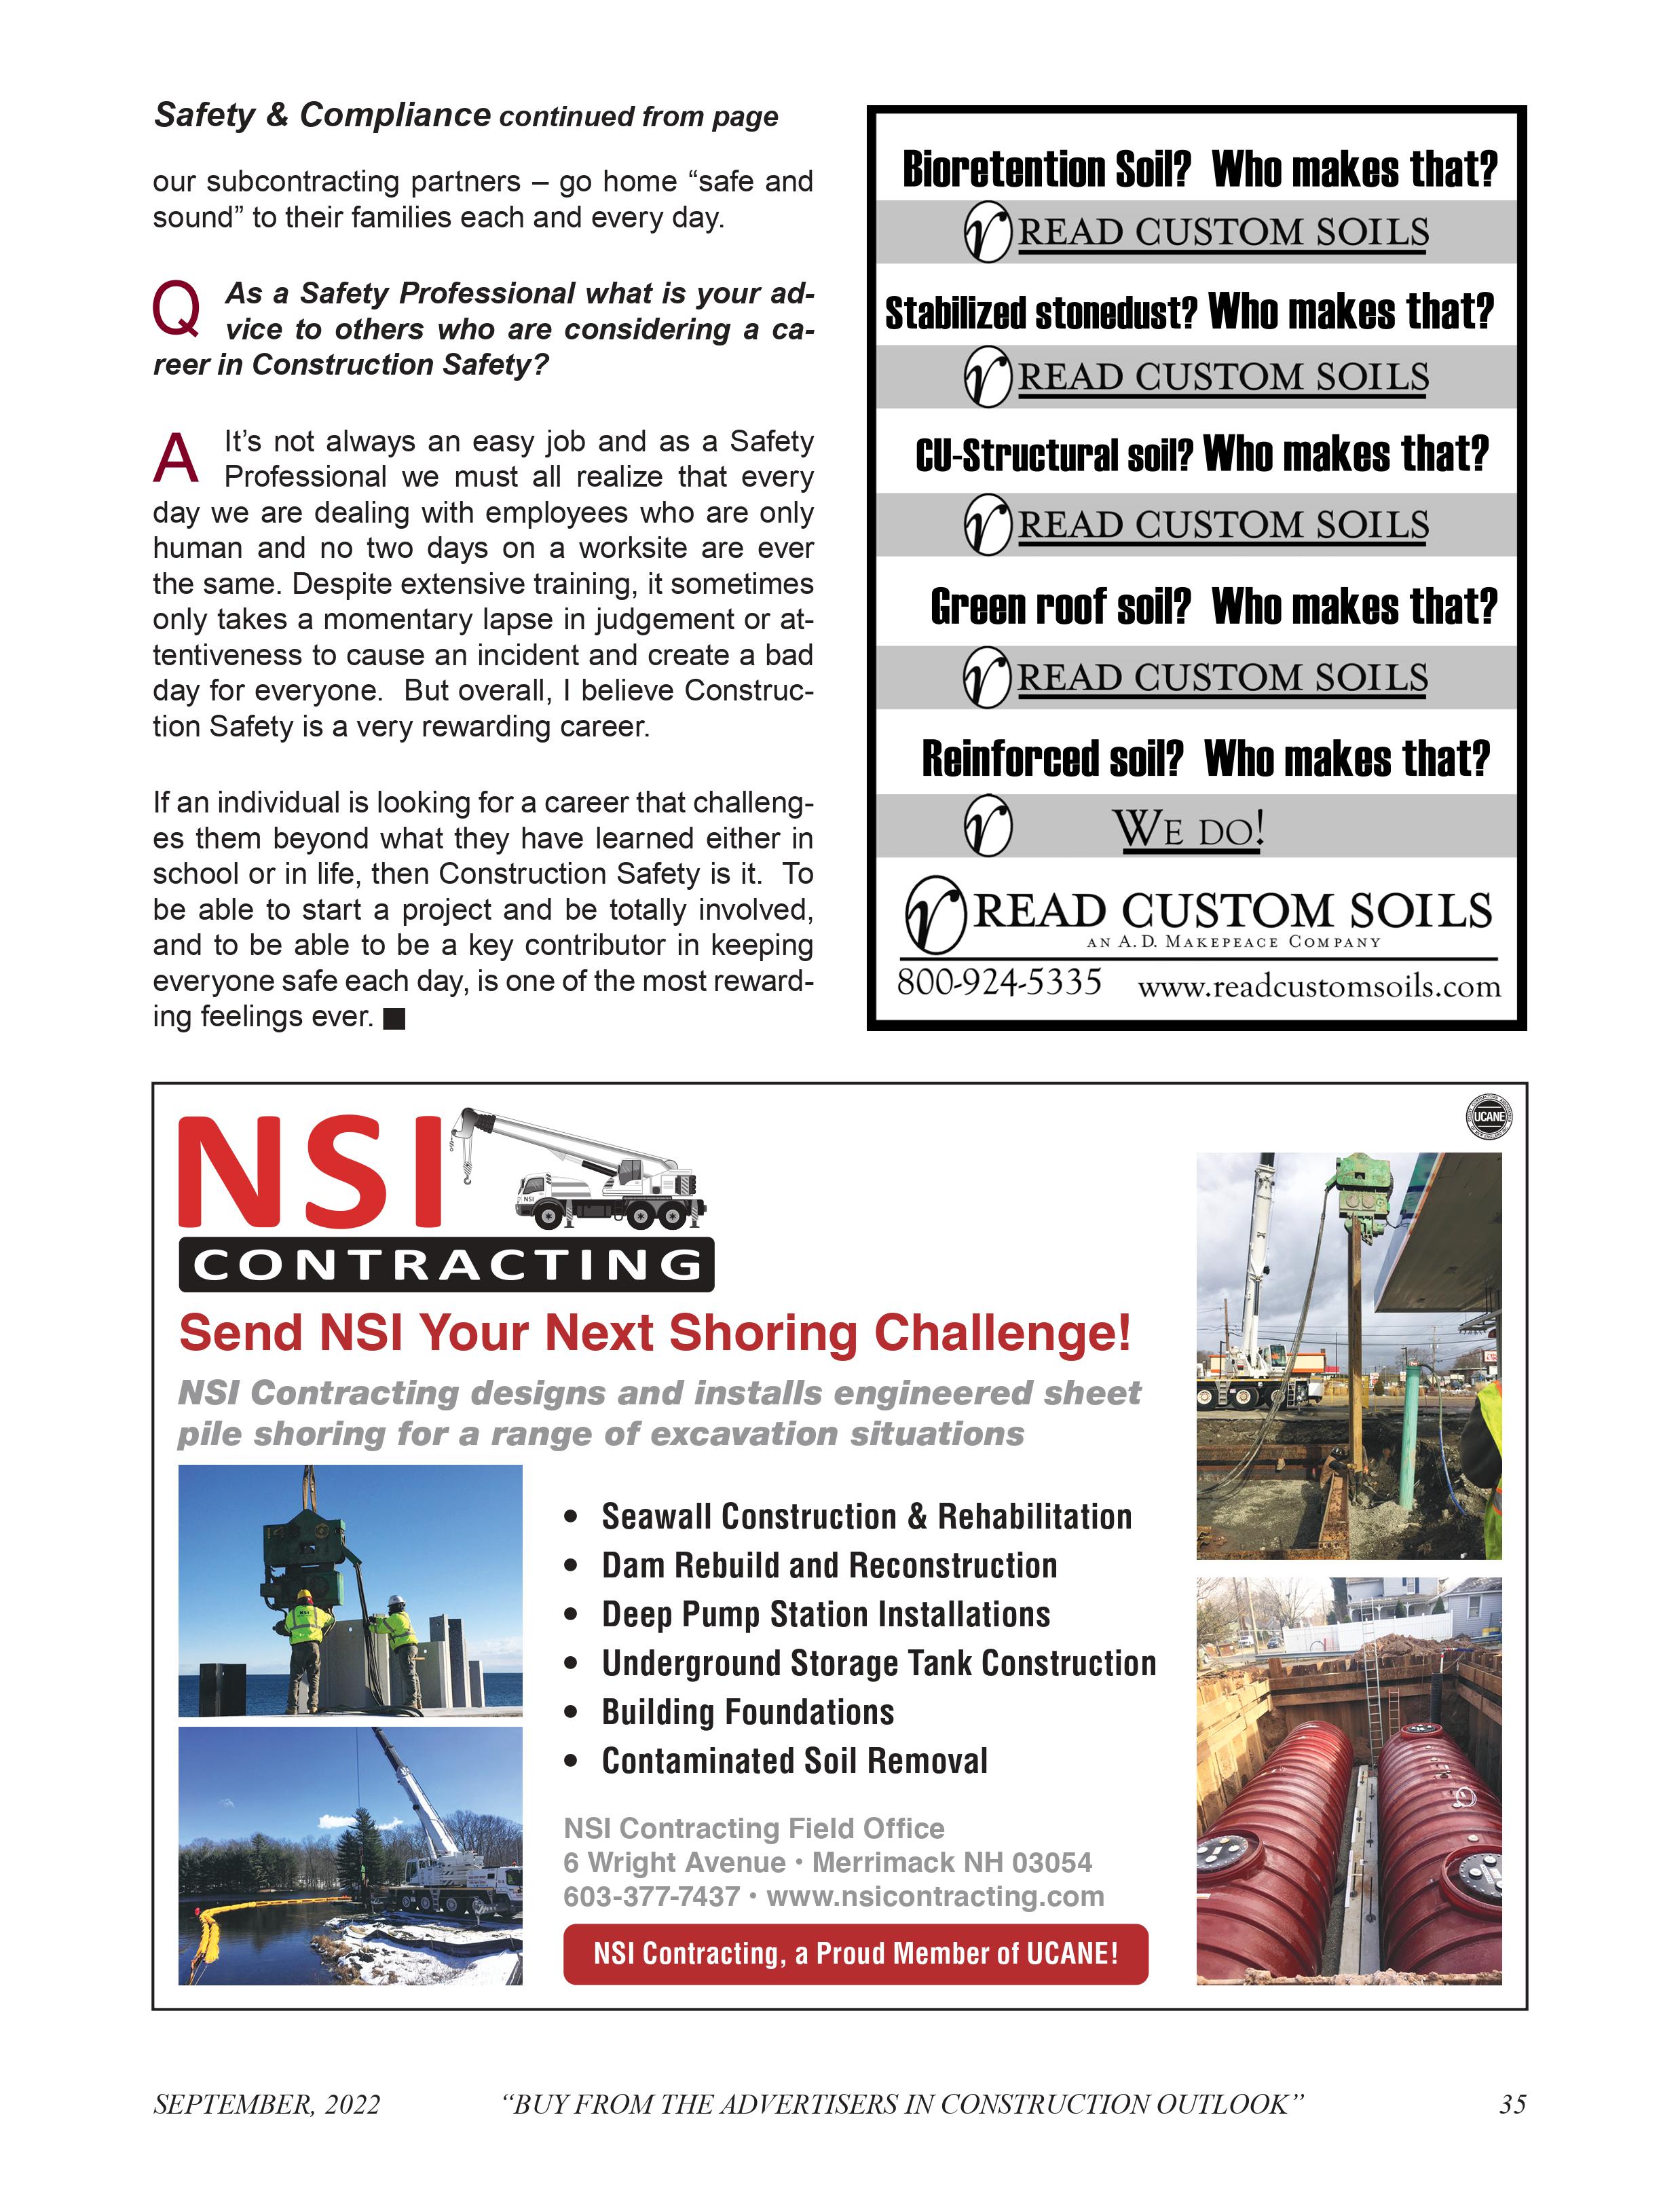 Construction Safety & Compliance: An Interview with Rich Denham Page 3